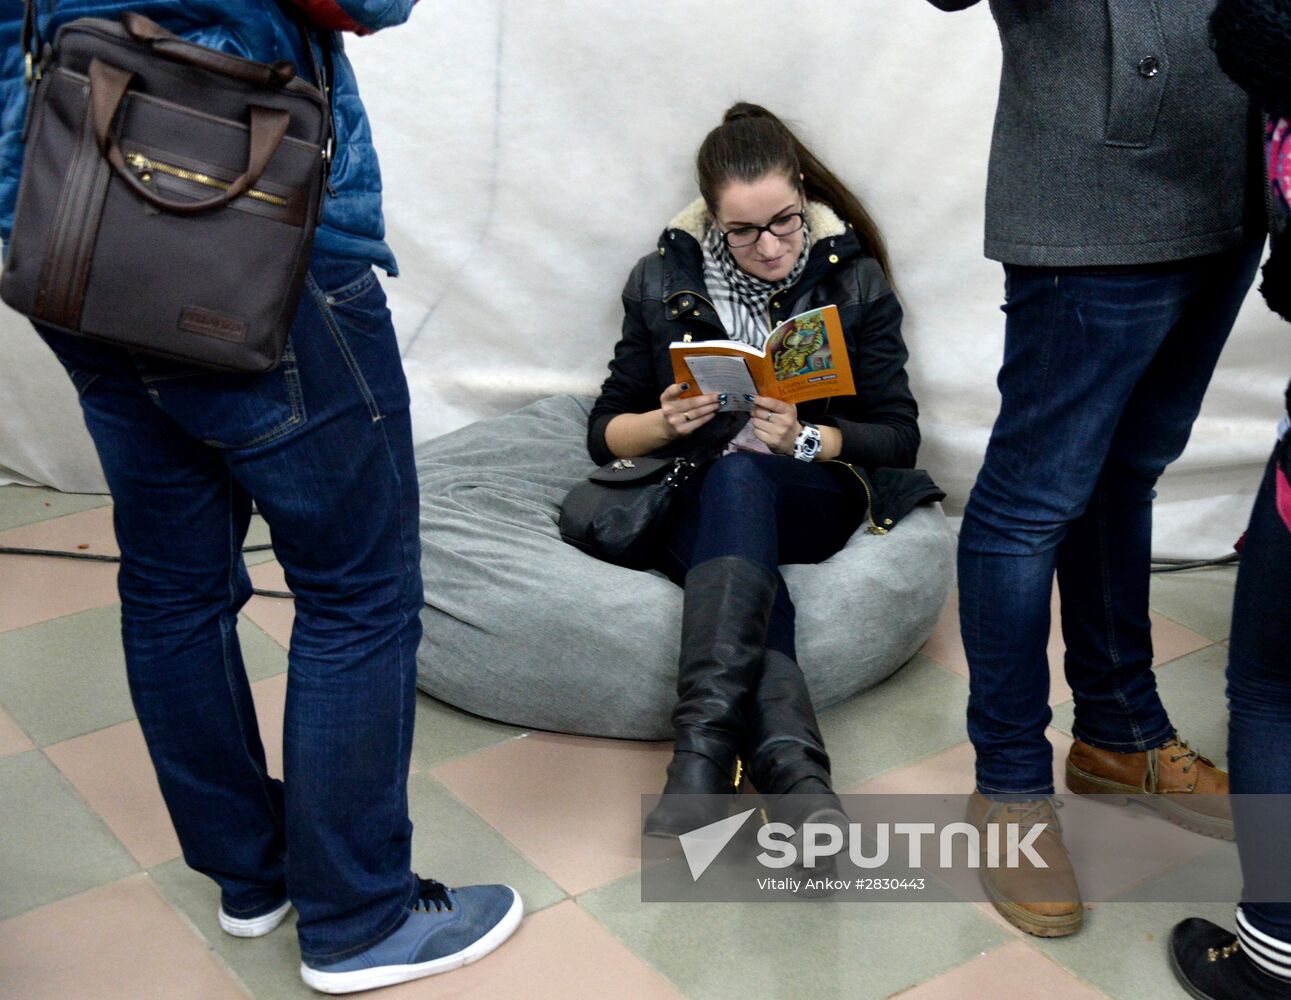 Library Night national event in Russian cities